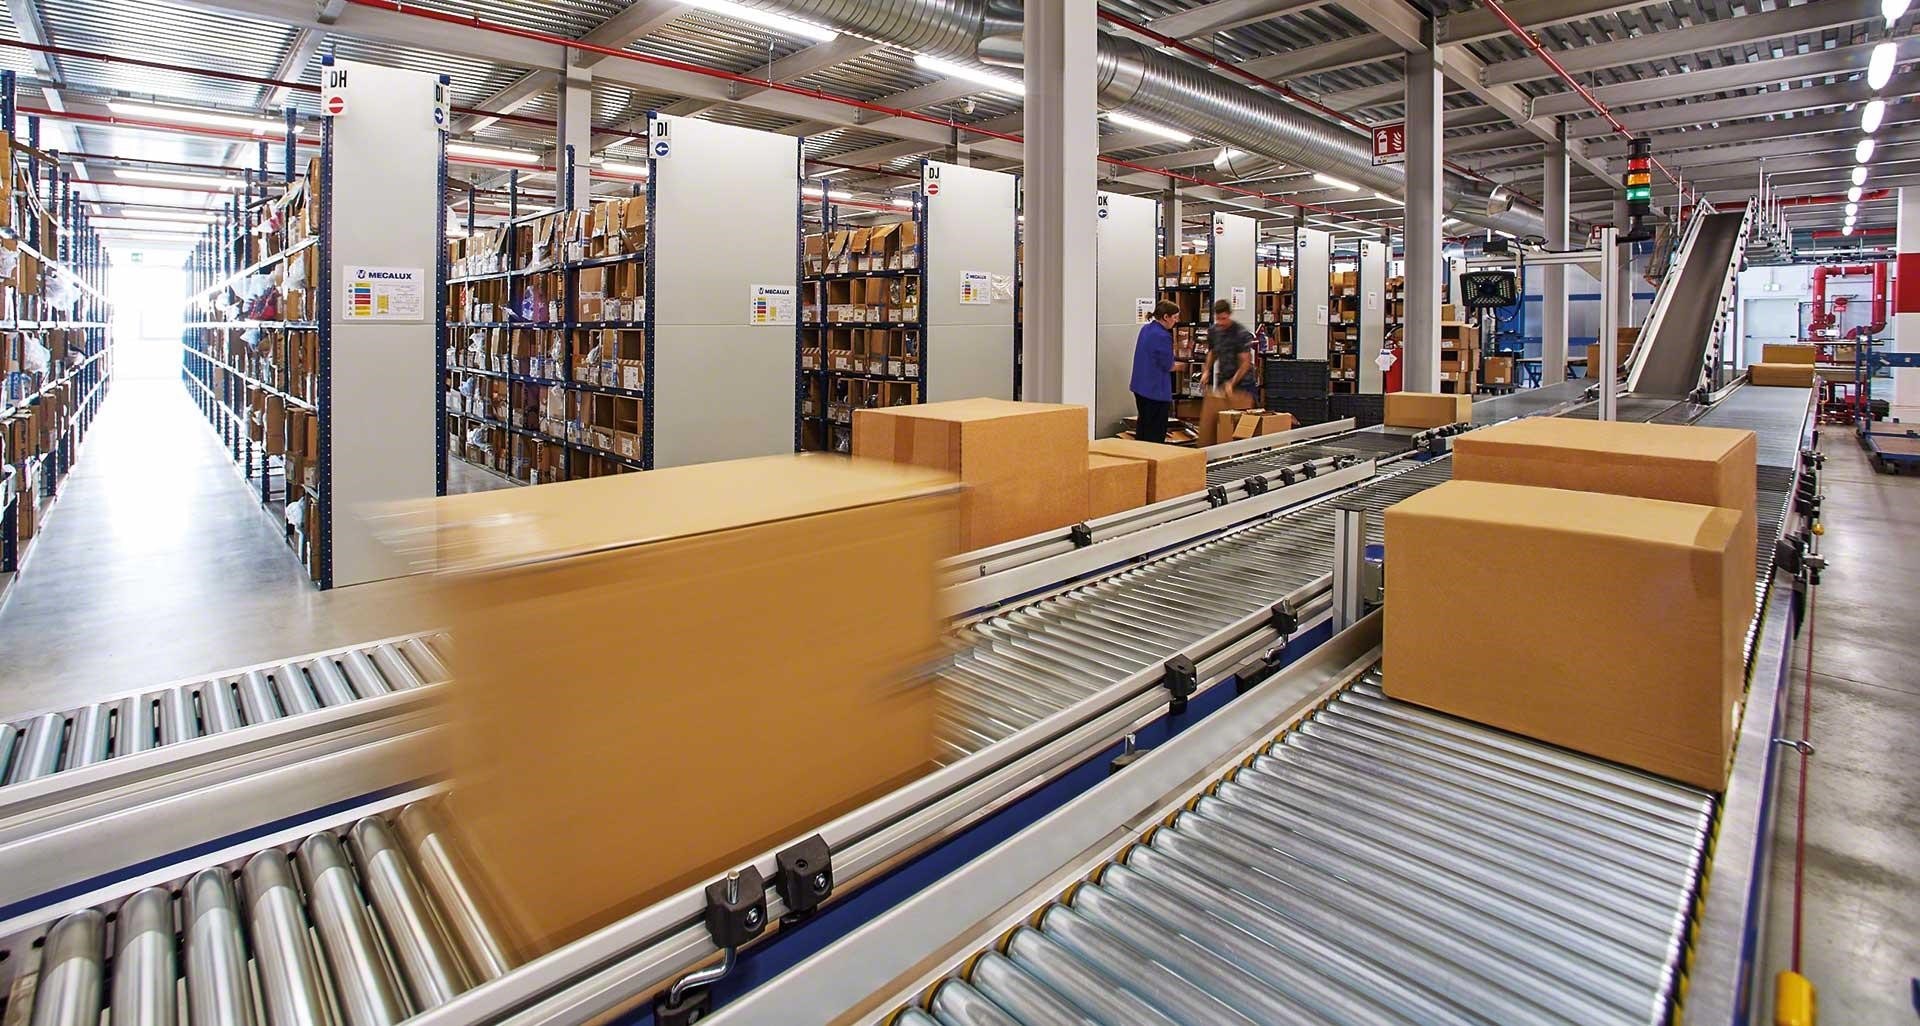 Stock turnover affects warehouse activity